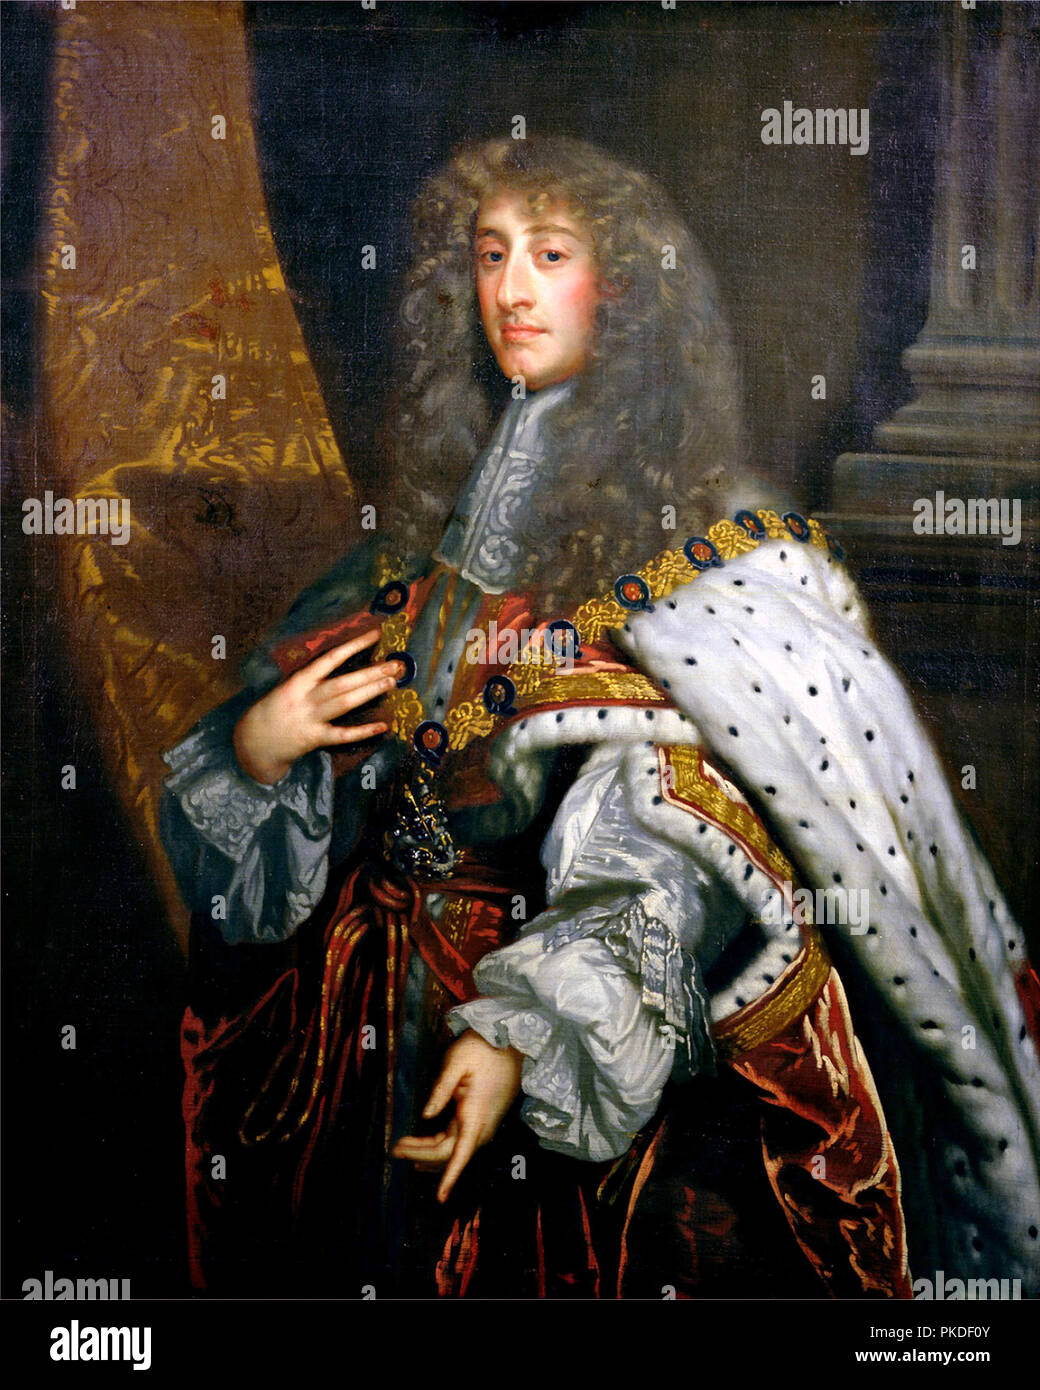 King James II (1633-1701) James II and VII, King of England and Ireland as James II and King of Scotland as James VII. Painting by Peter Lely Stock Photo